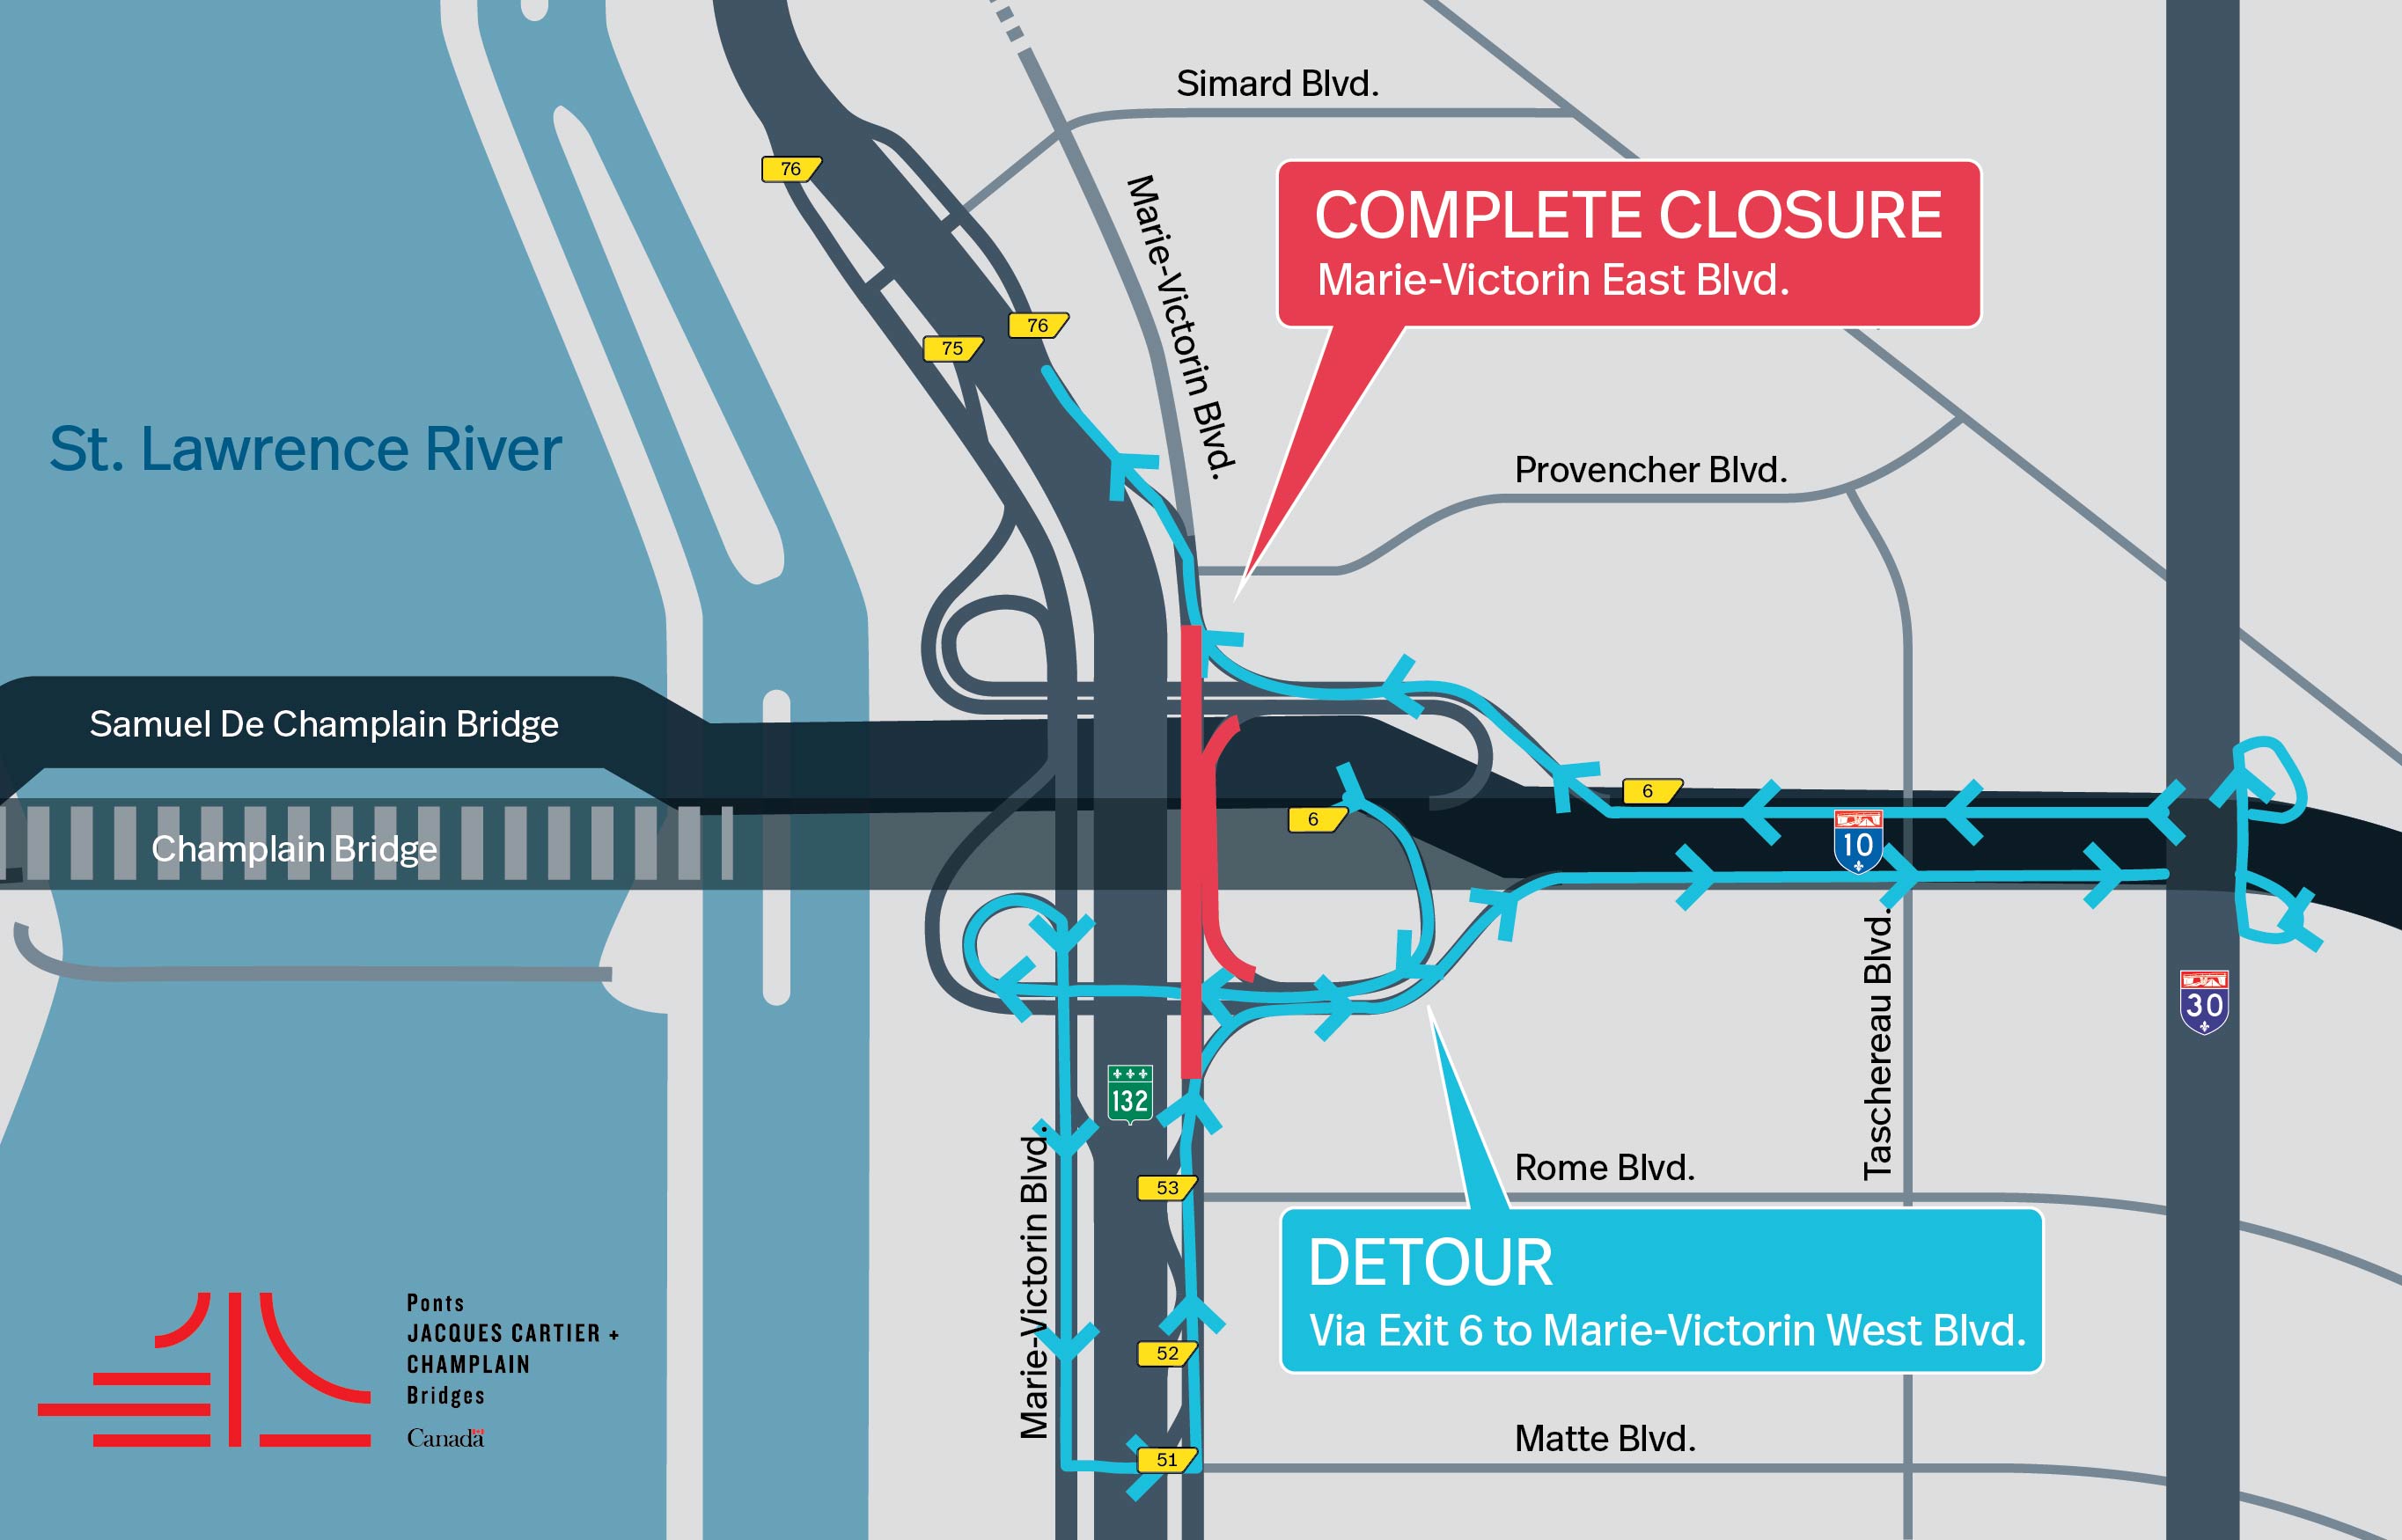 Brossard Sector | Complete closure of Blvd. Marie-Victorin East under the original Champlain Bridge on January 10